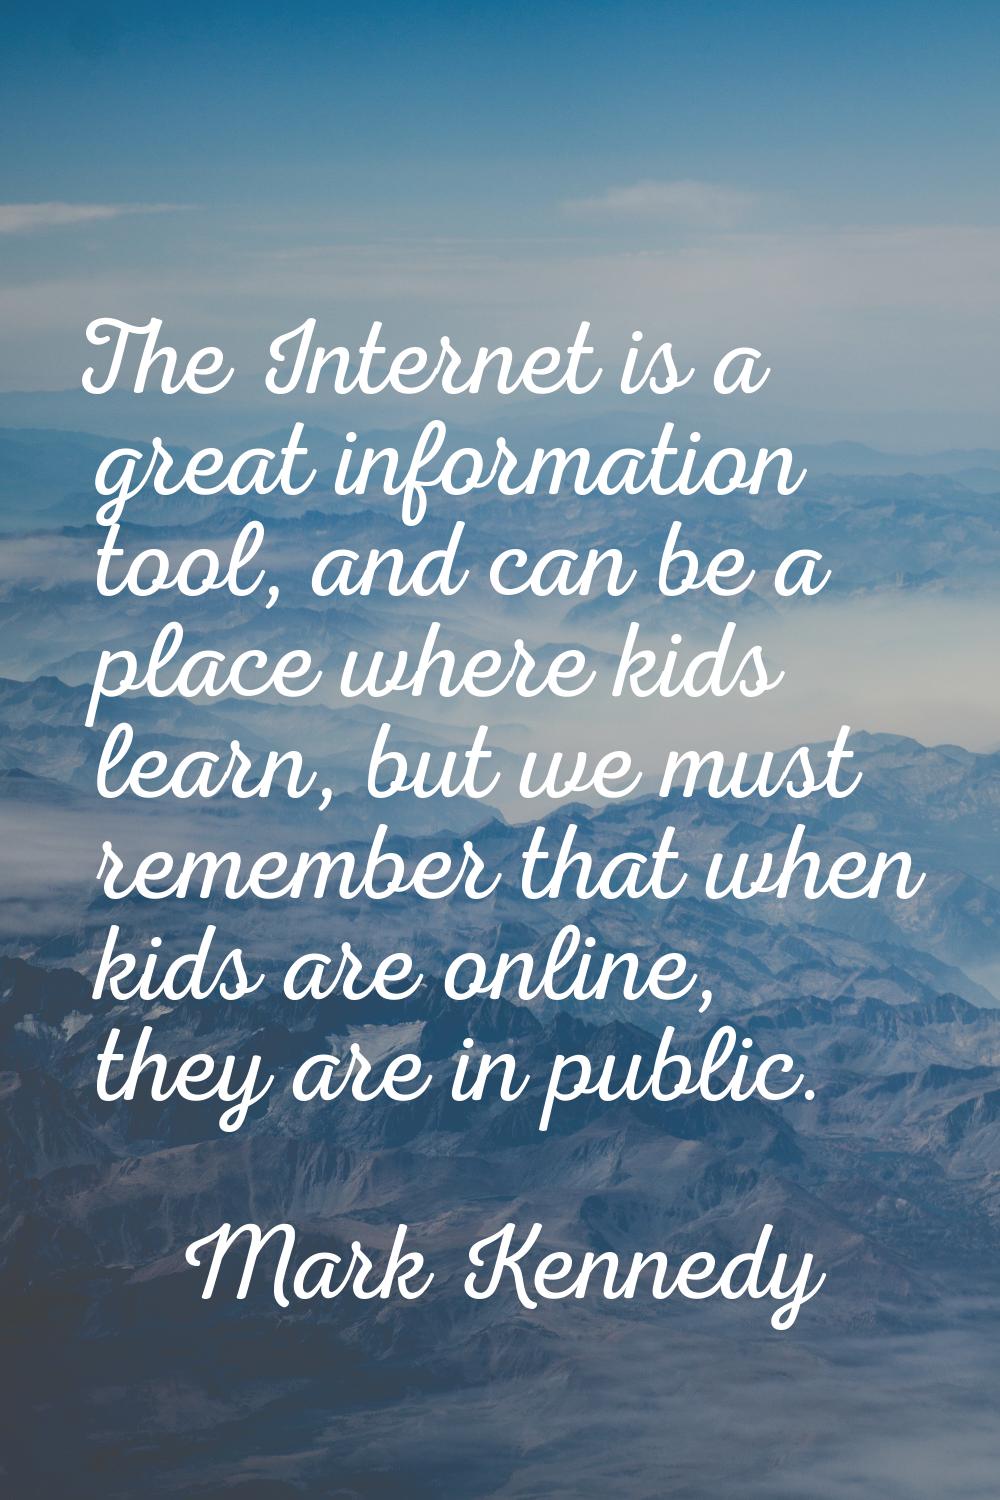 The Internet is a great information tool, and can be a place where kids learn, but we must remember